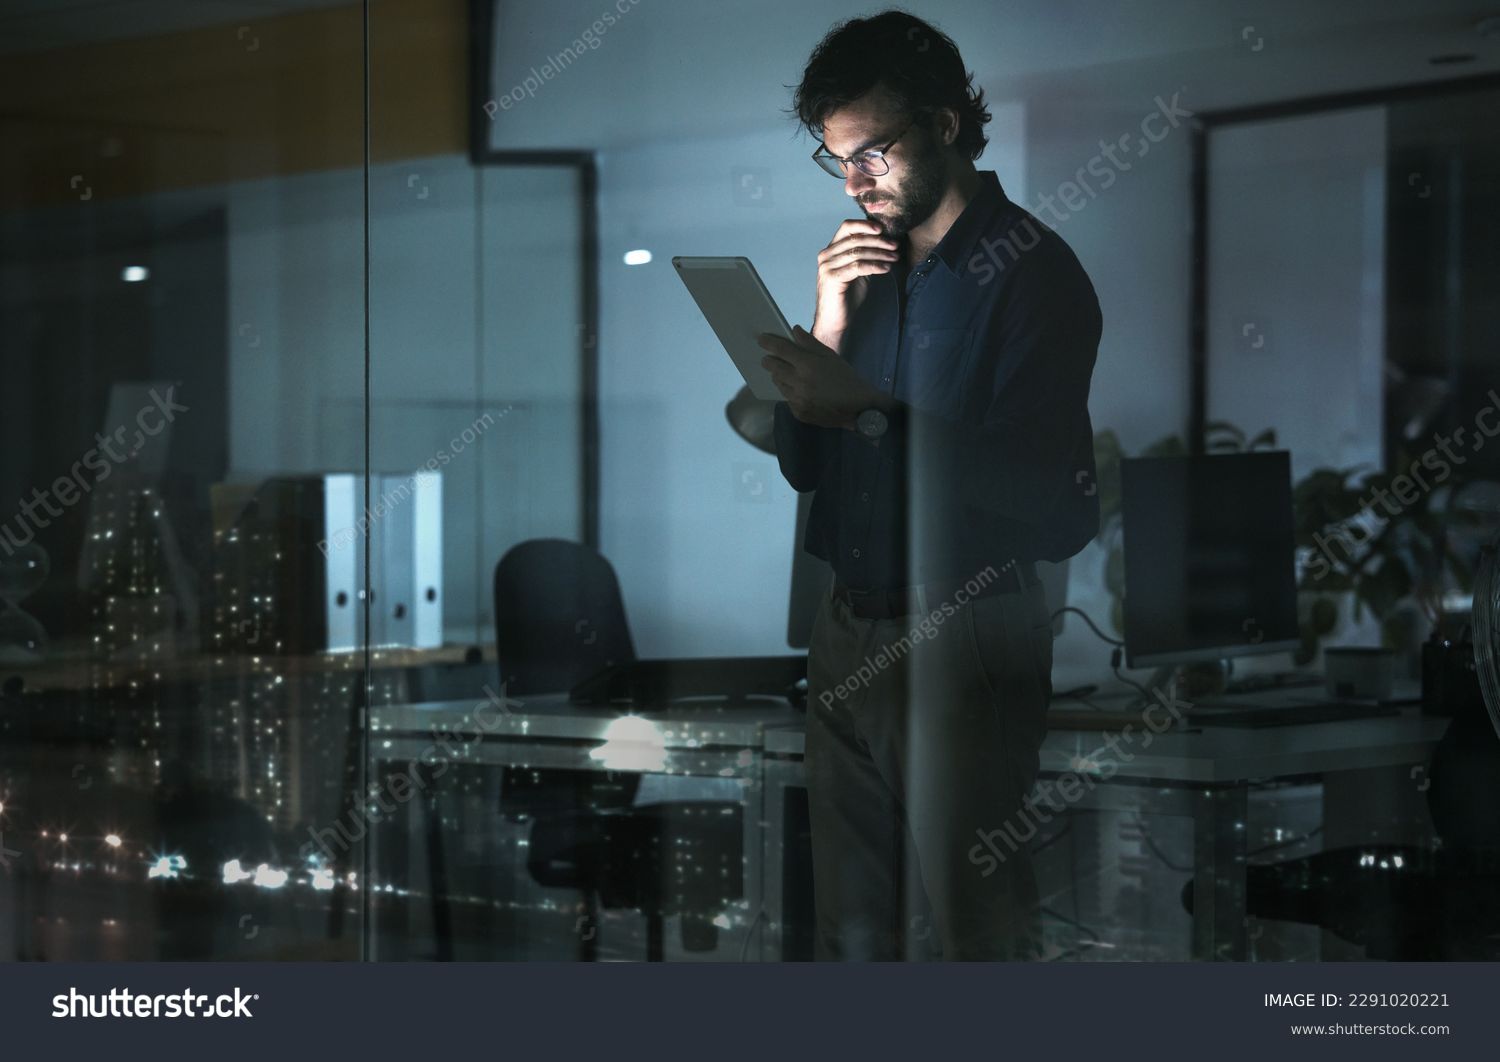 Business man, tablet and thinking in office, problem solving or looking for solution by window with city lights at night. Technology, idea and professional person with touchscreen to focus on reading #2291020221